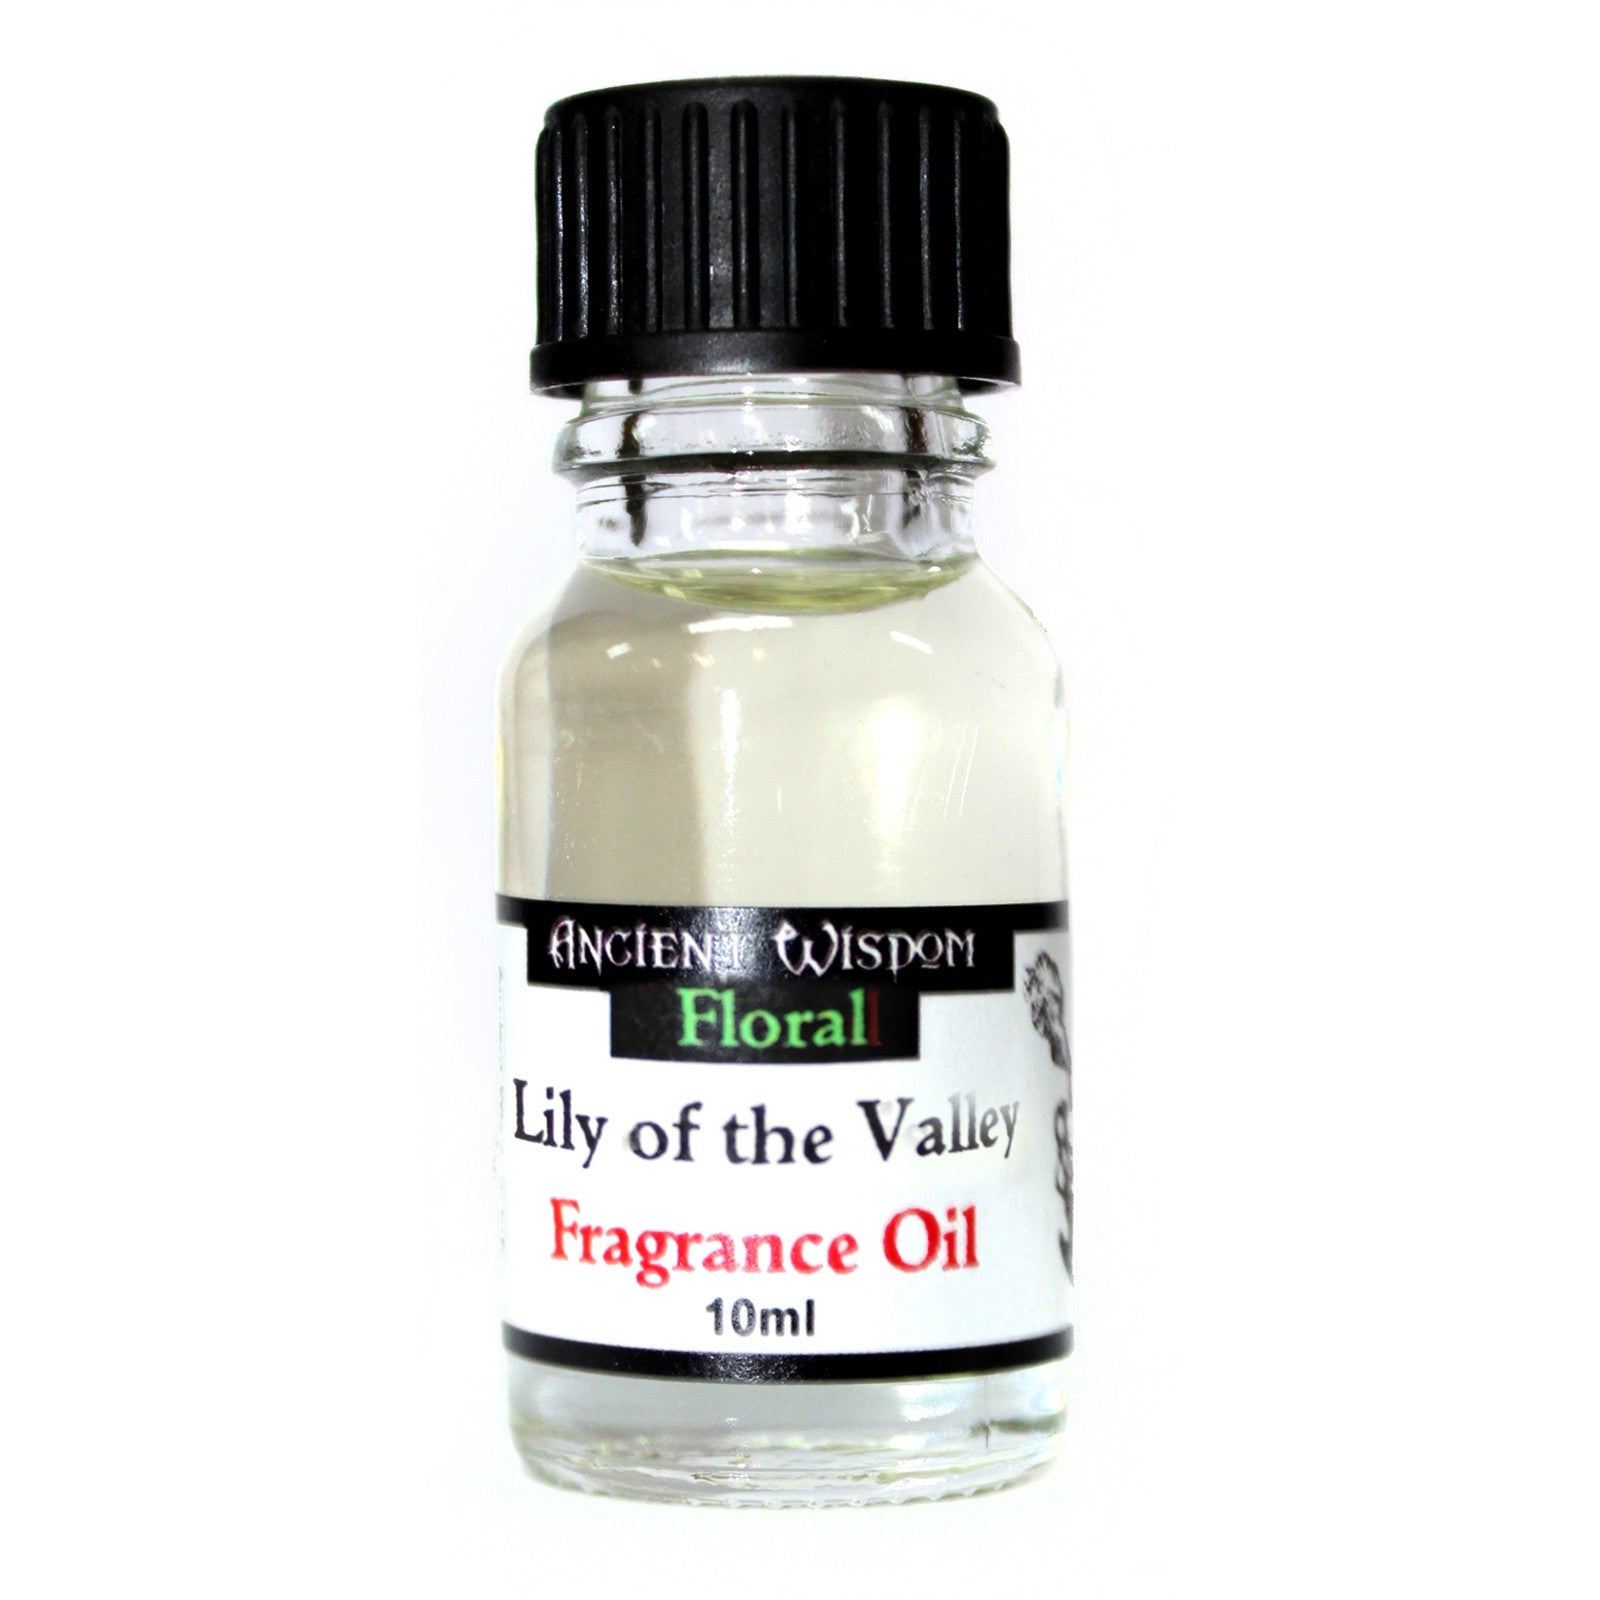 View 10ml Lily Of The Valley Fragrance Oil information